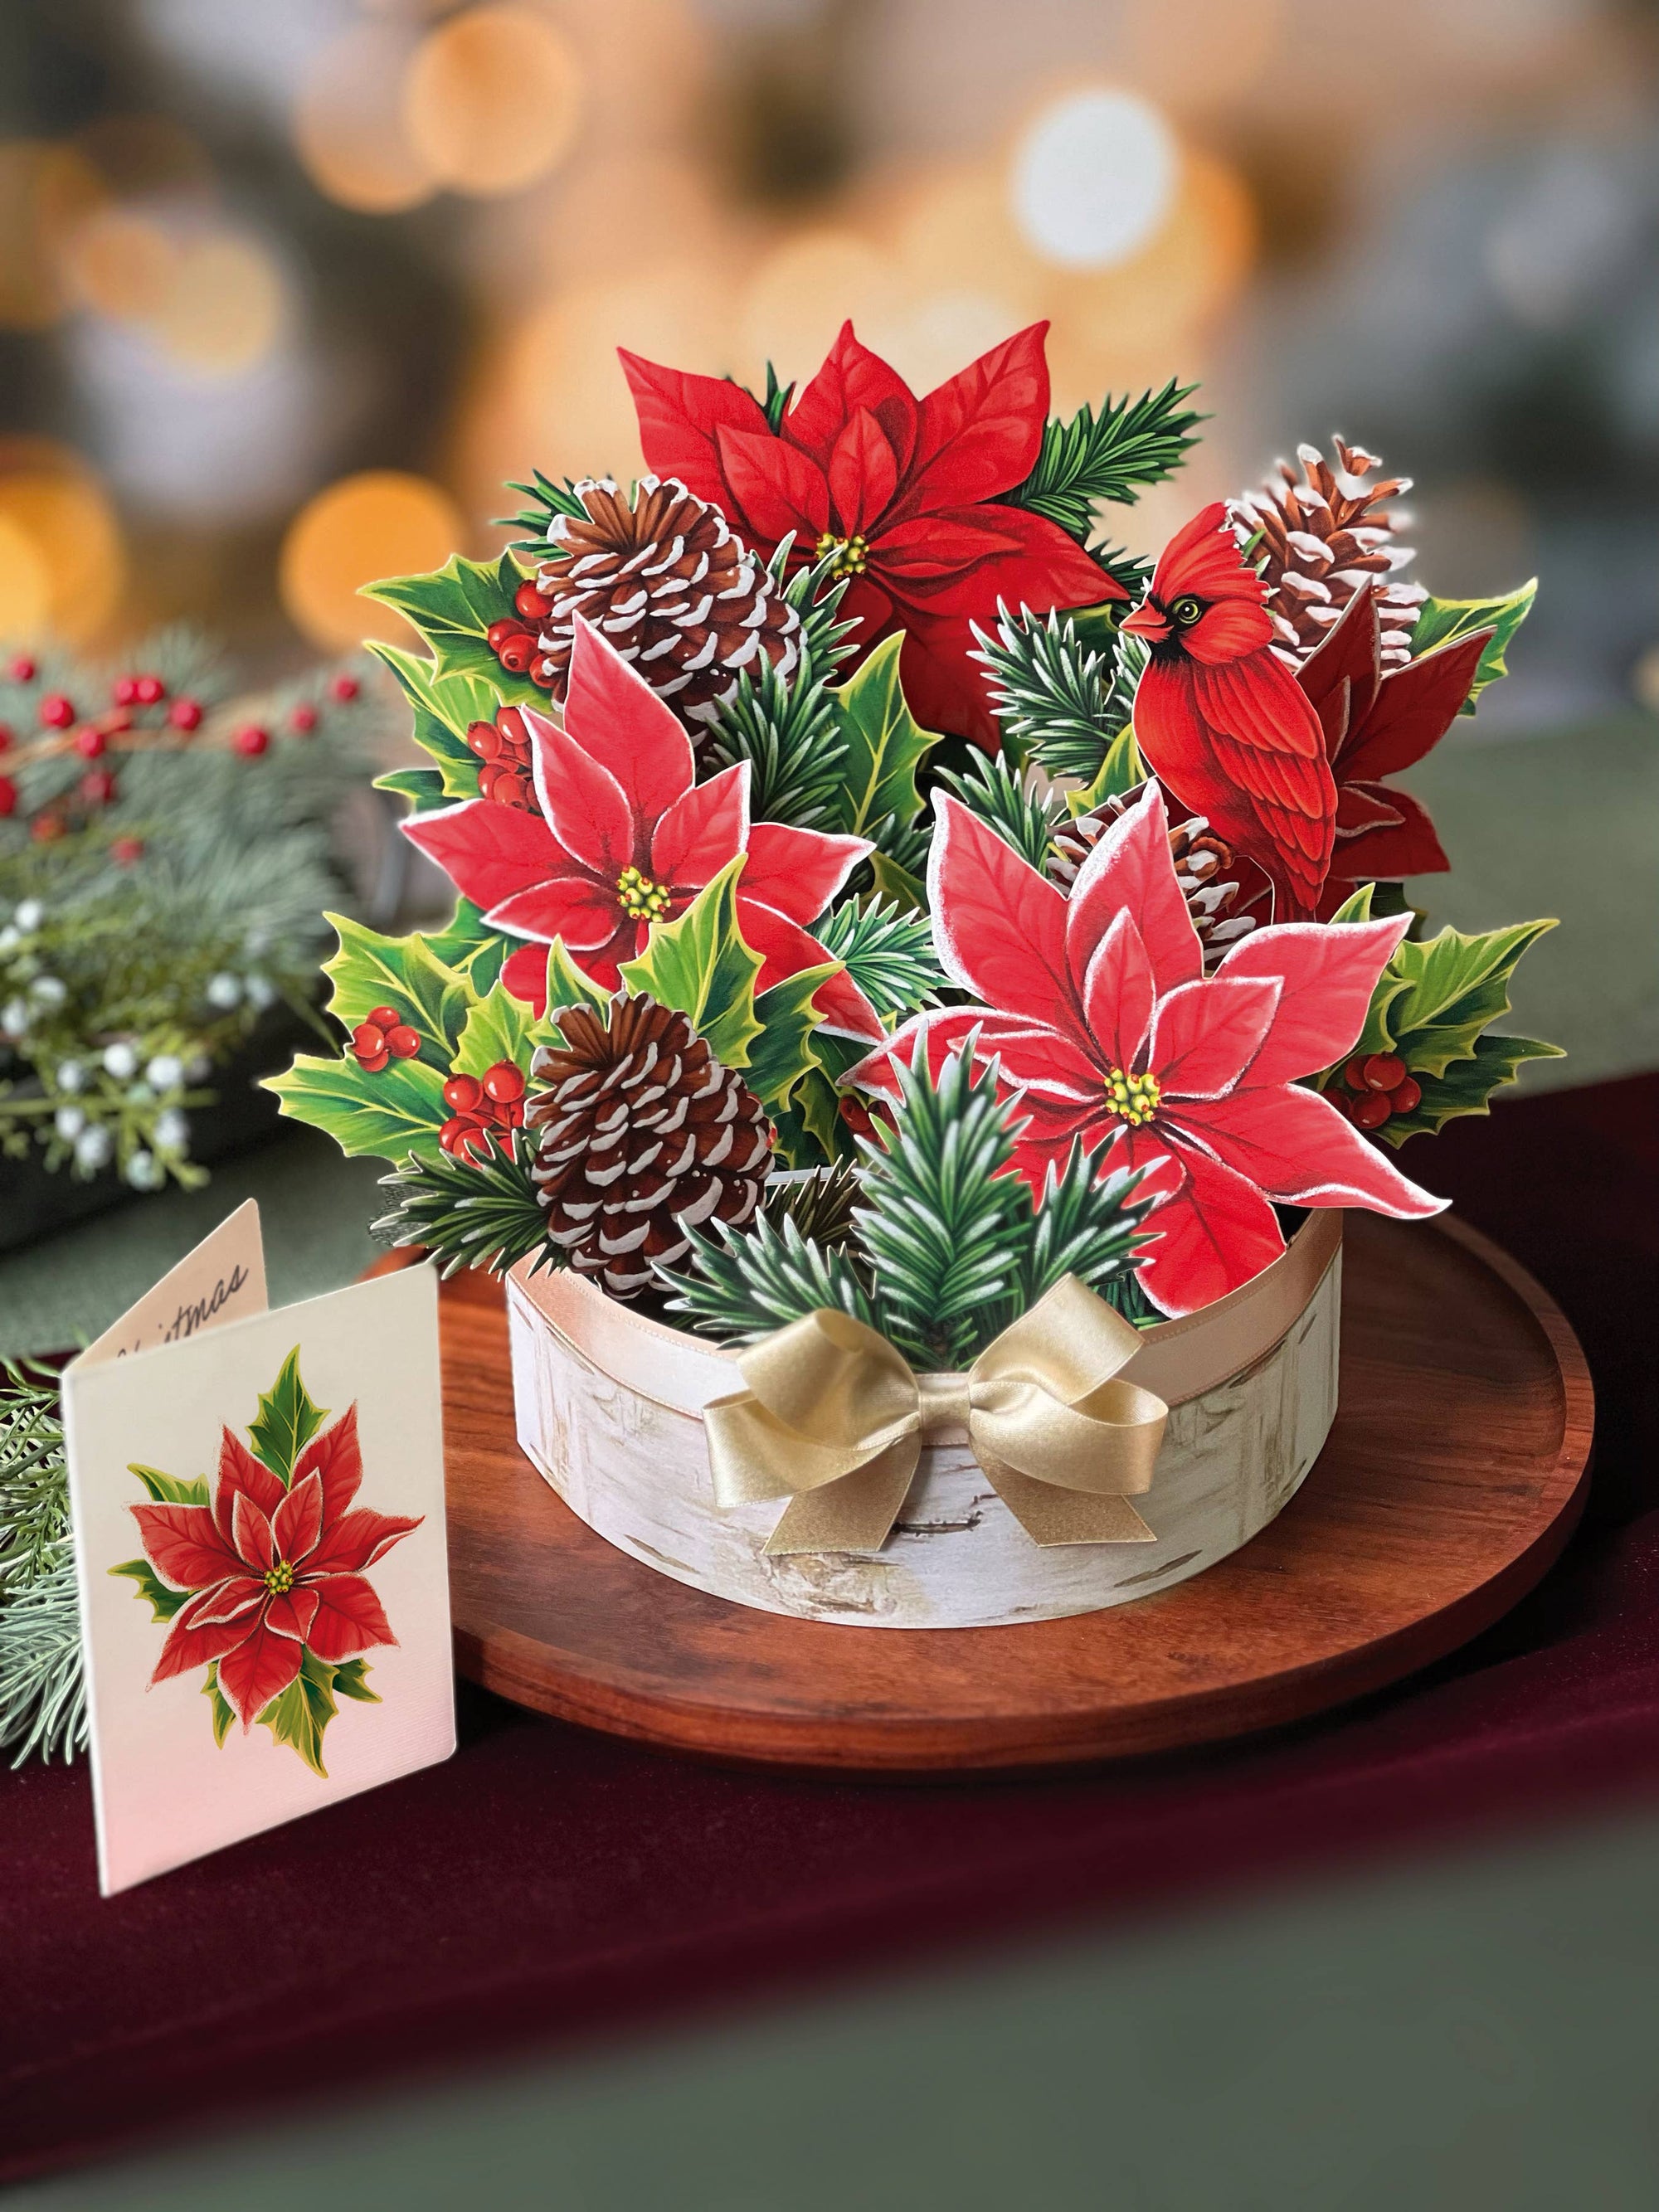 Birch Poinsettia (8 Pop-up Greeting Cards)